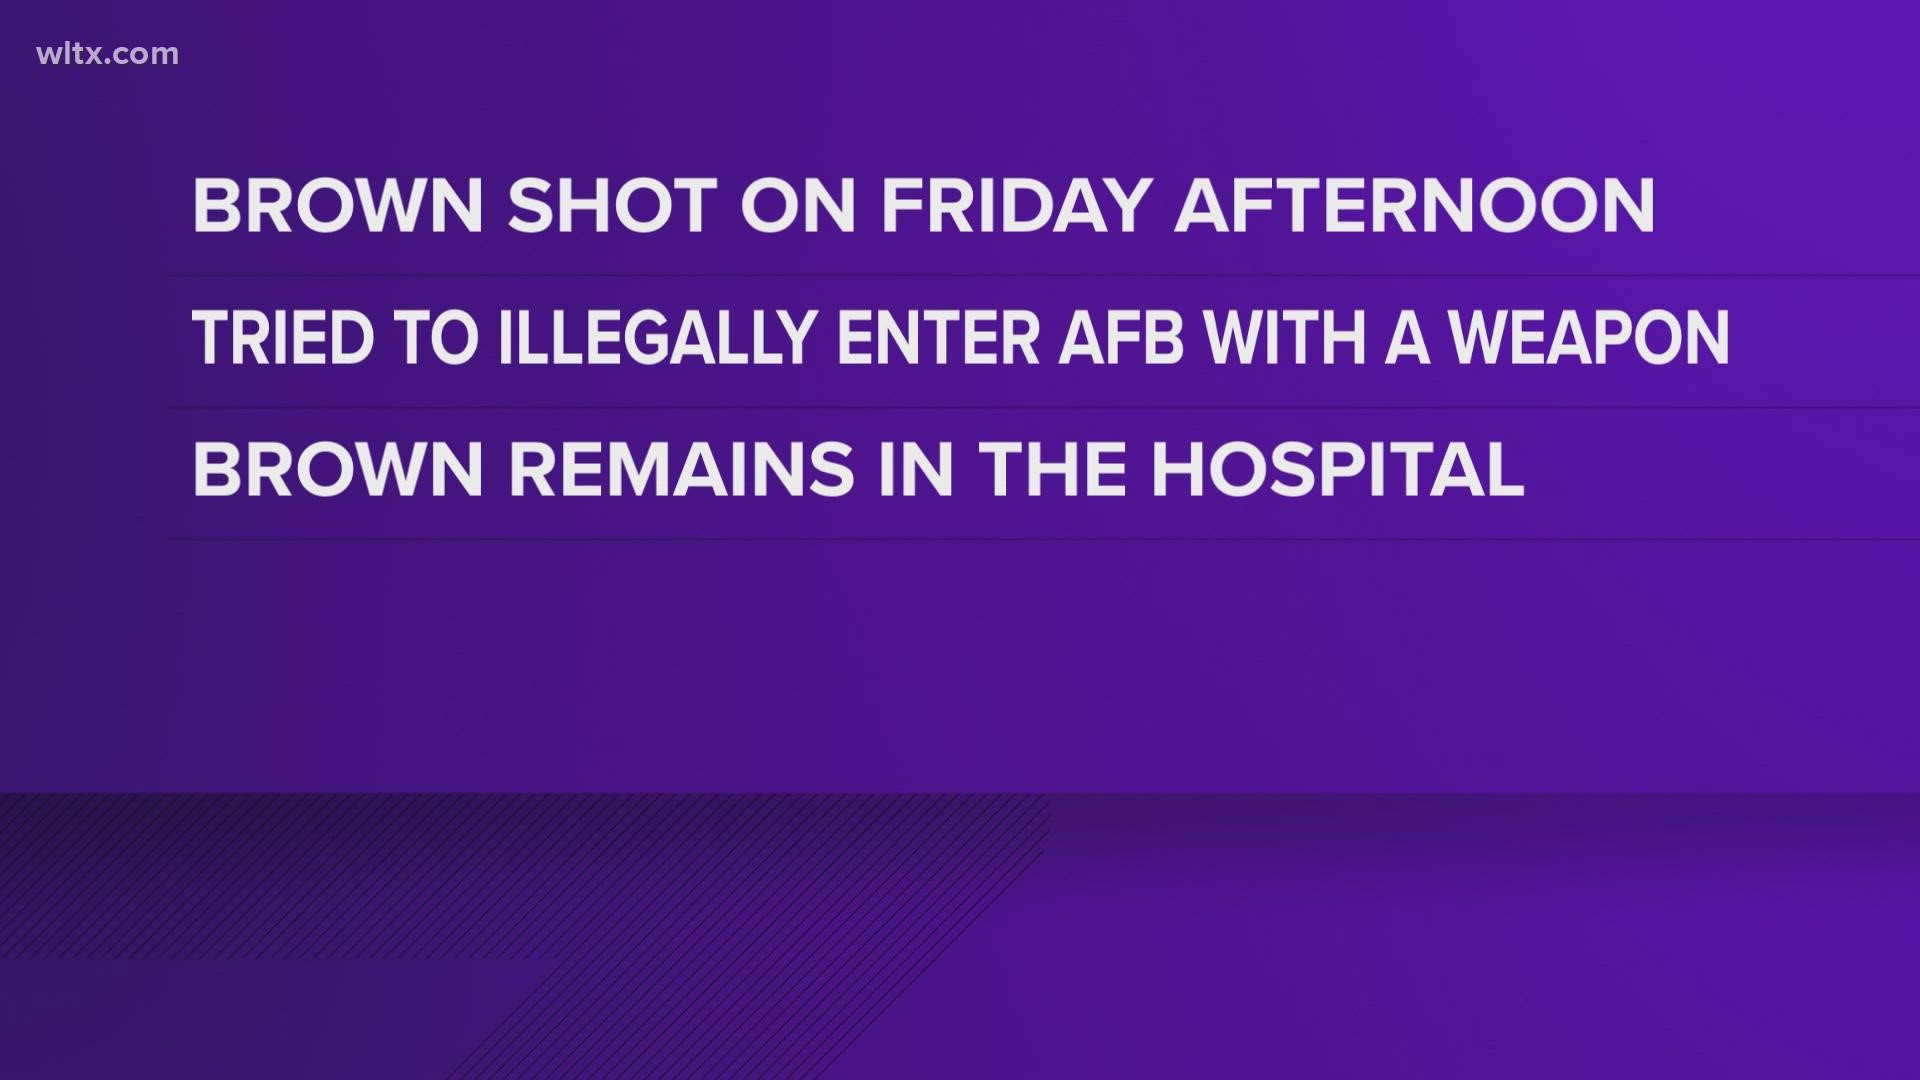 During the incident, an airman shot and injured the Antonio Brown after he reportedly pointed a weapon at the Airman.